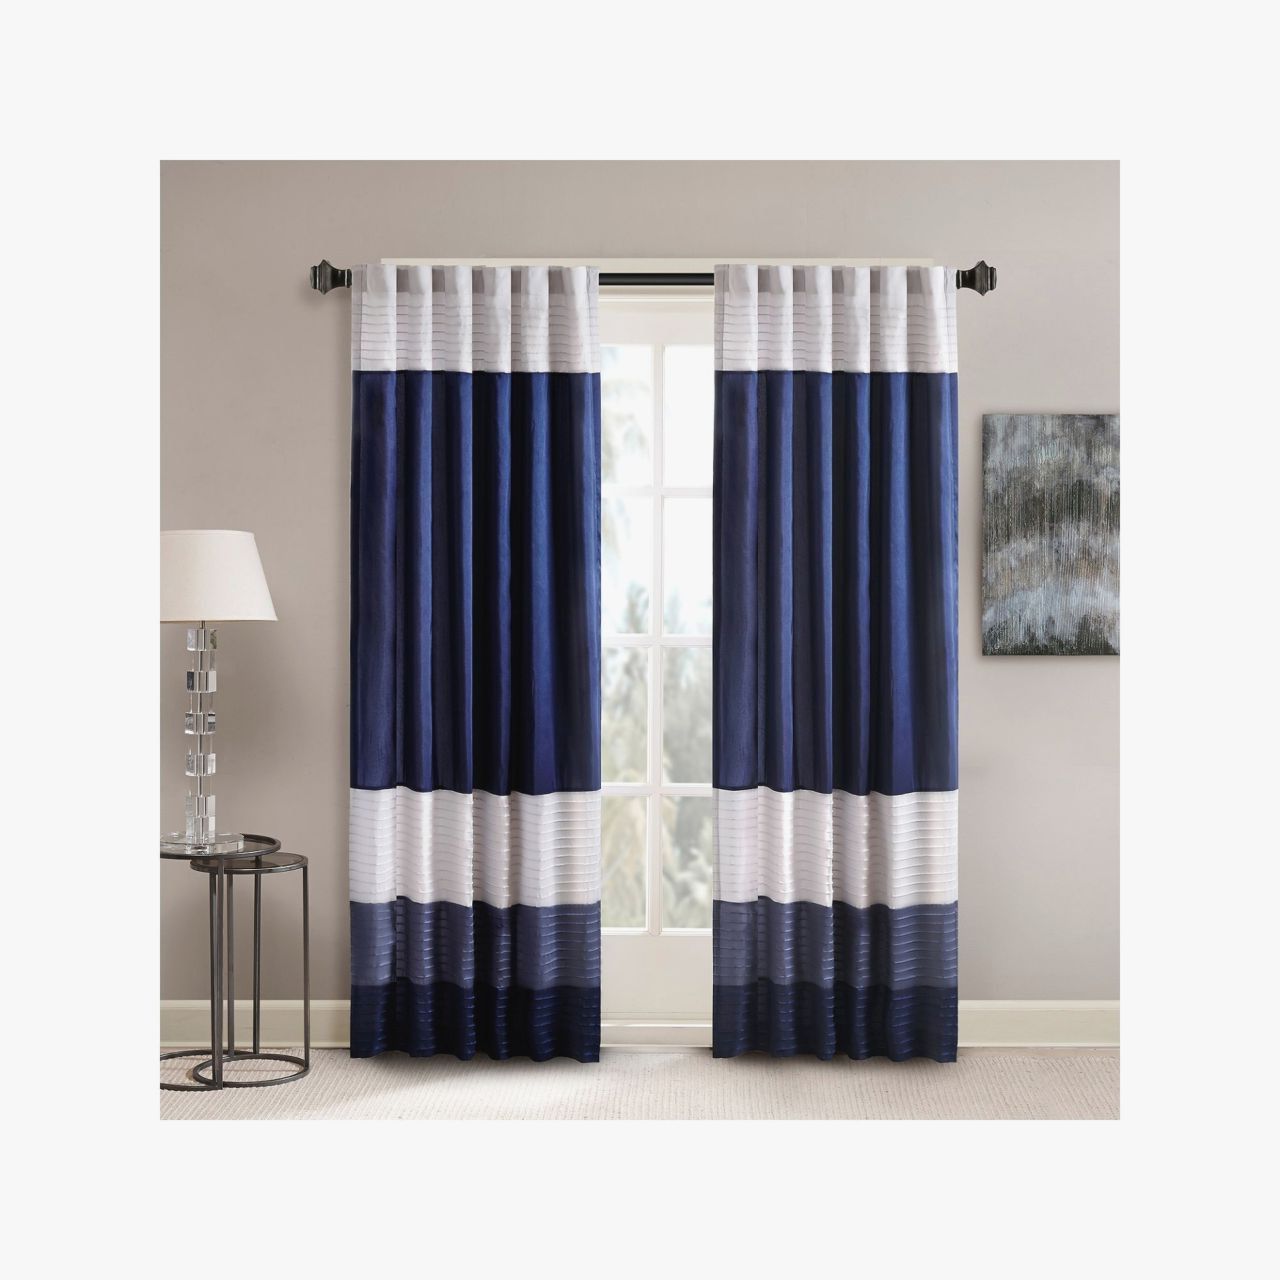 Laya Fretwork Burnout Sheer Curtain Panels In Preferred Essentials Madison Park Curtain Panels – Kitschcat (View 12 of 20)